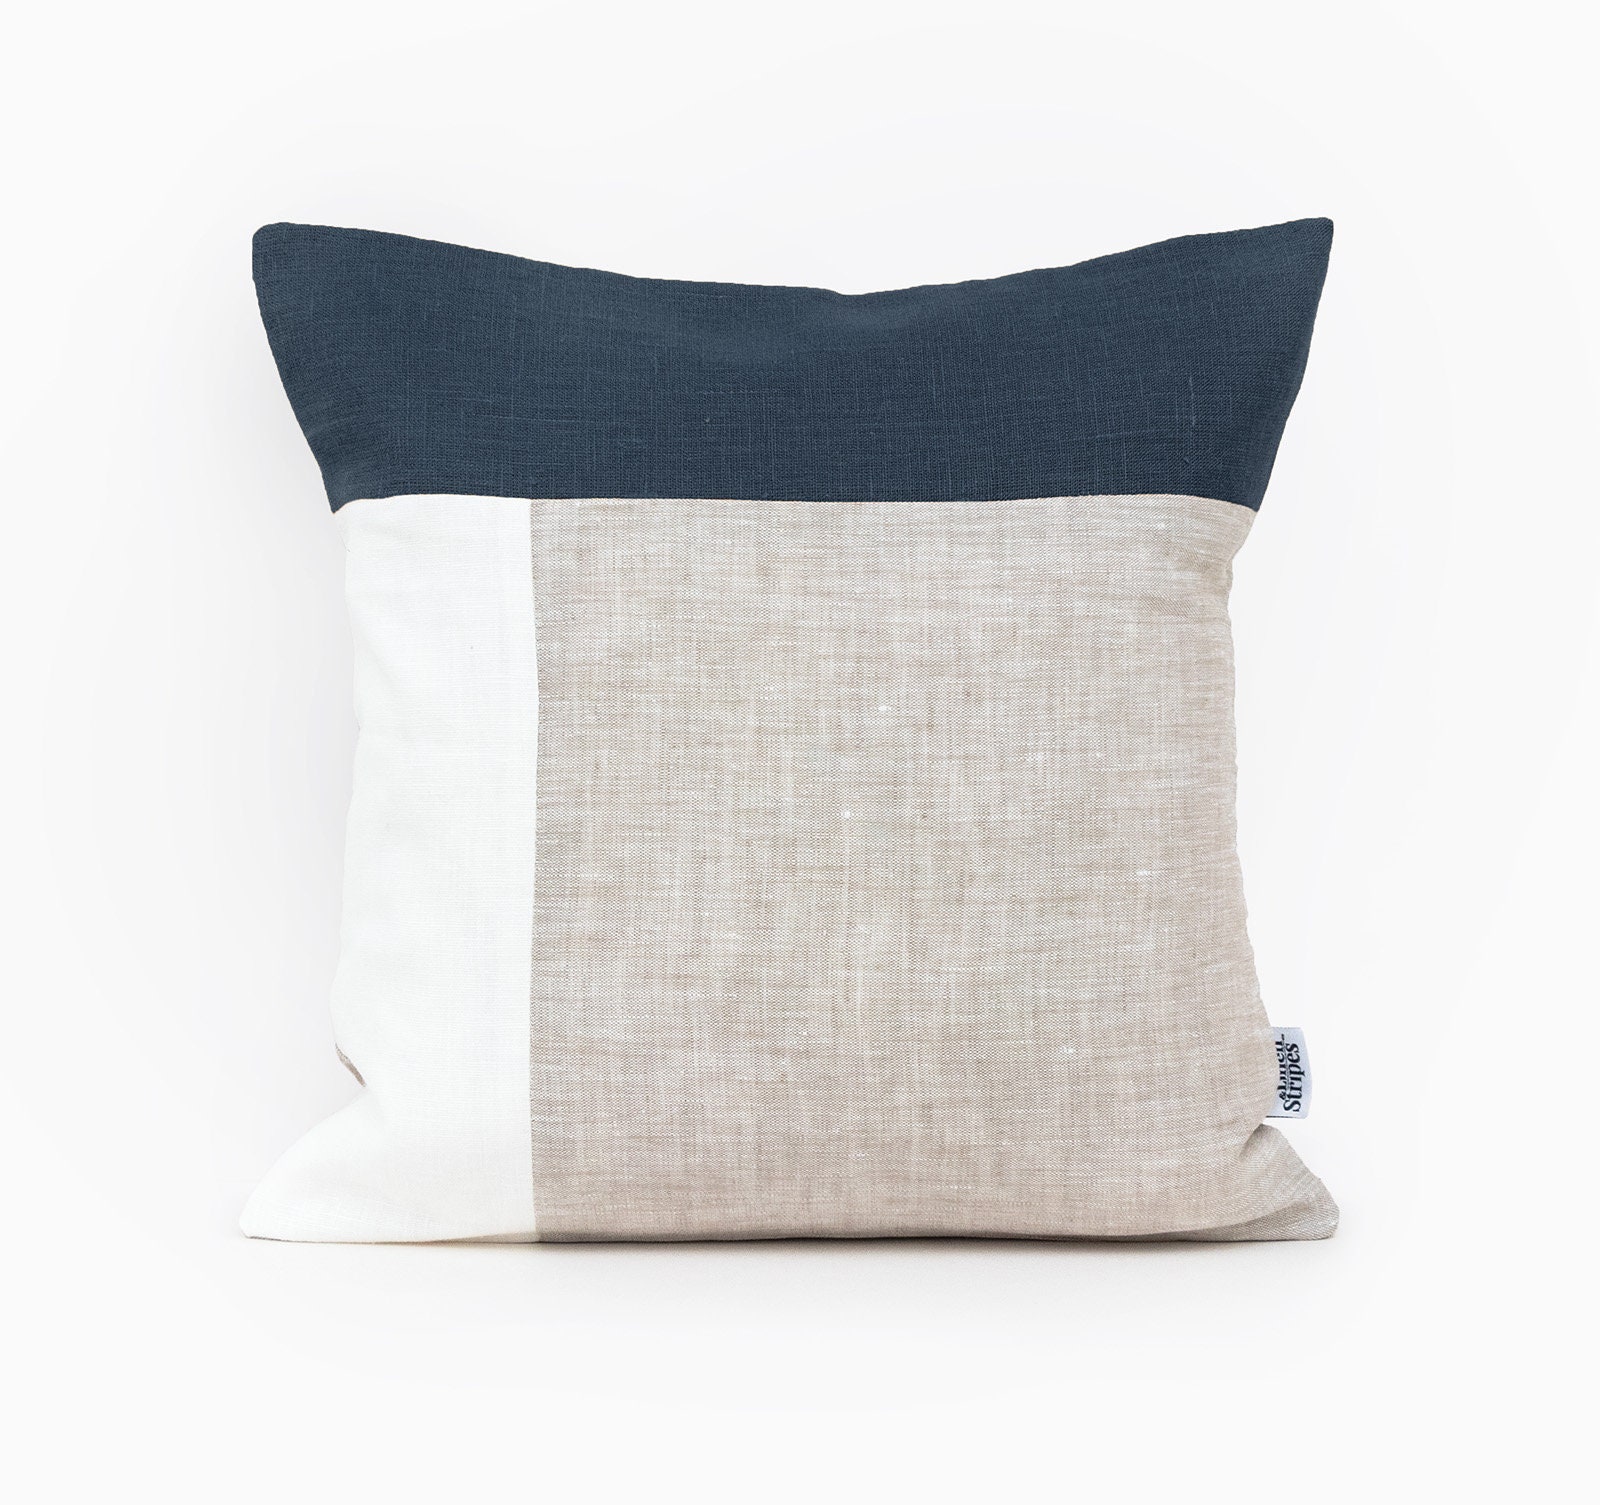 Wicked Plush Throw Pillow Federal Gray 24x24, Polyester | L.L.Bean